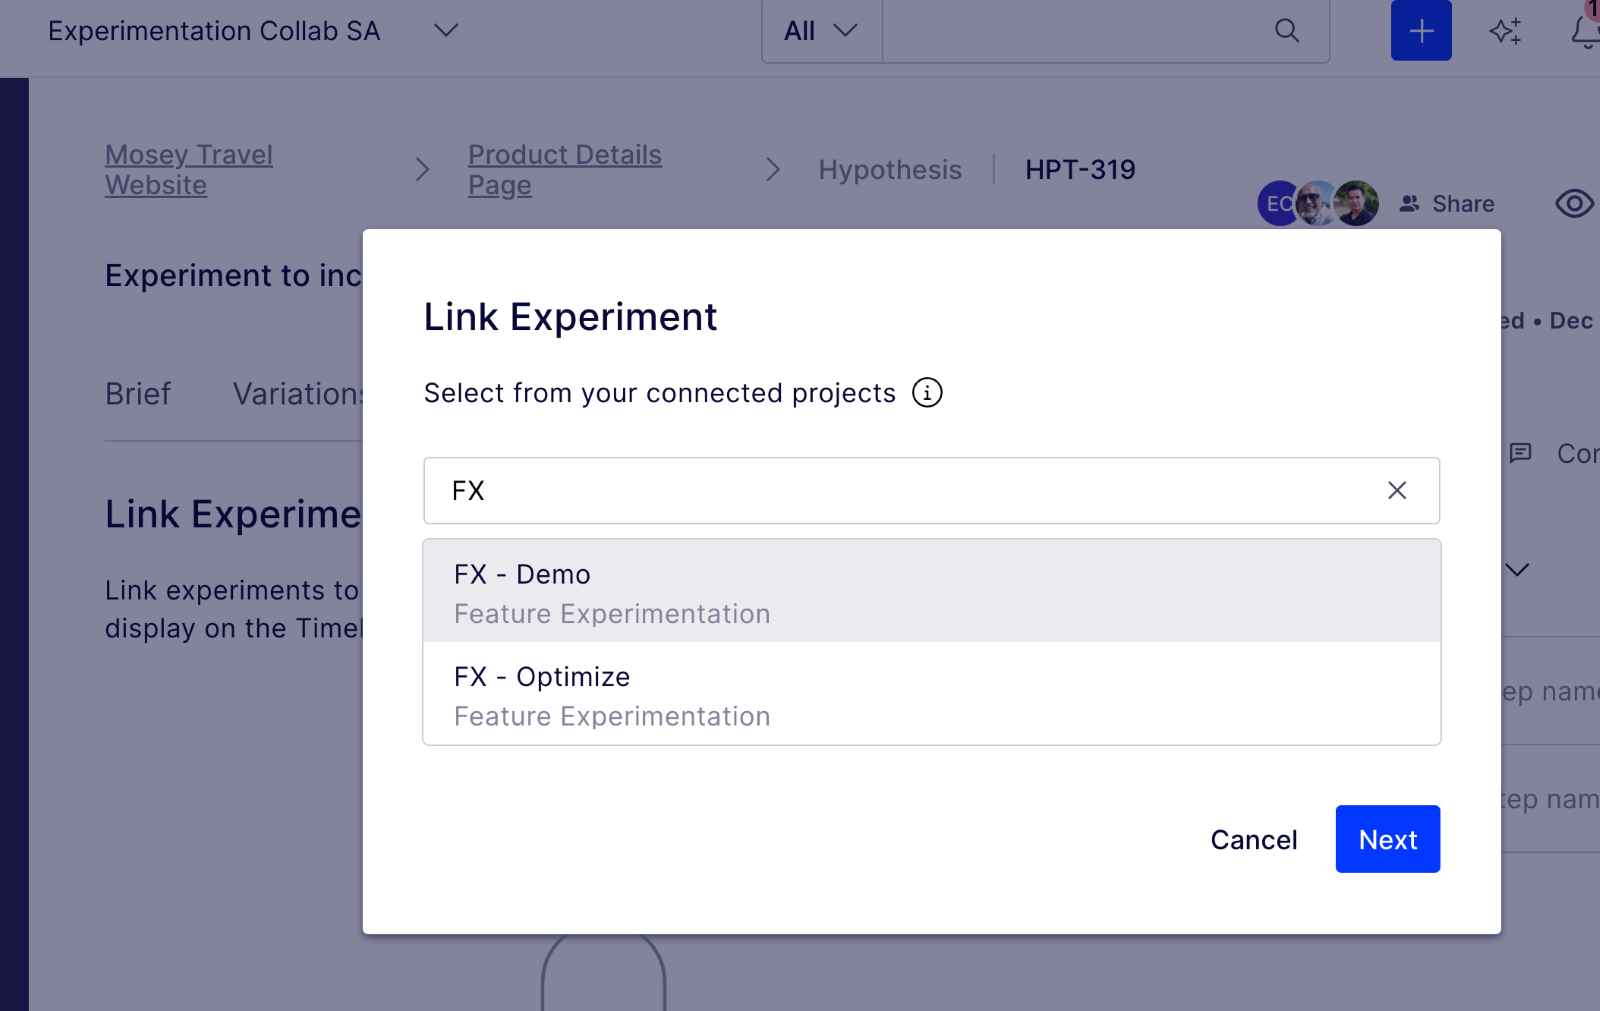 Linking experiments in the product interface